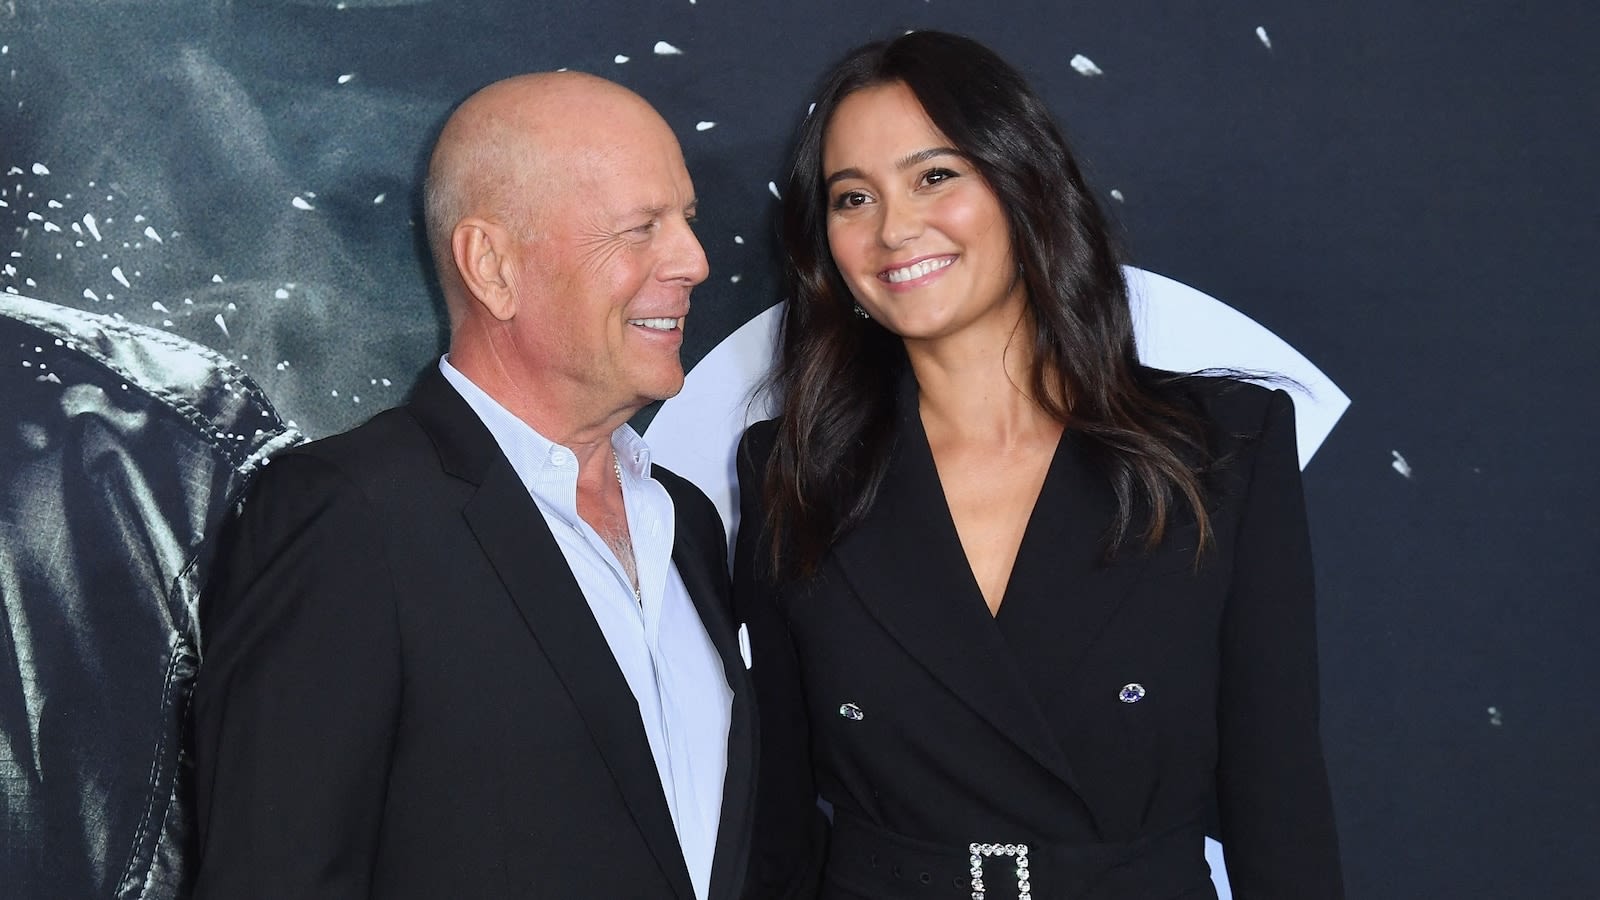 Bruce Willis' wife says family 'desperately needed' support after dementia diagnosis